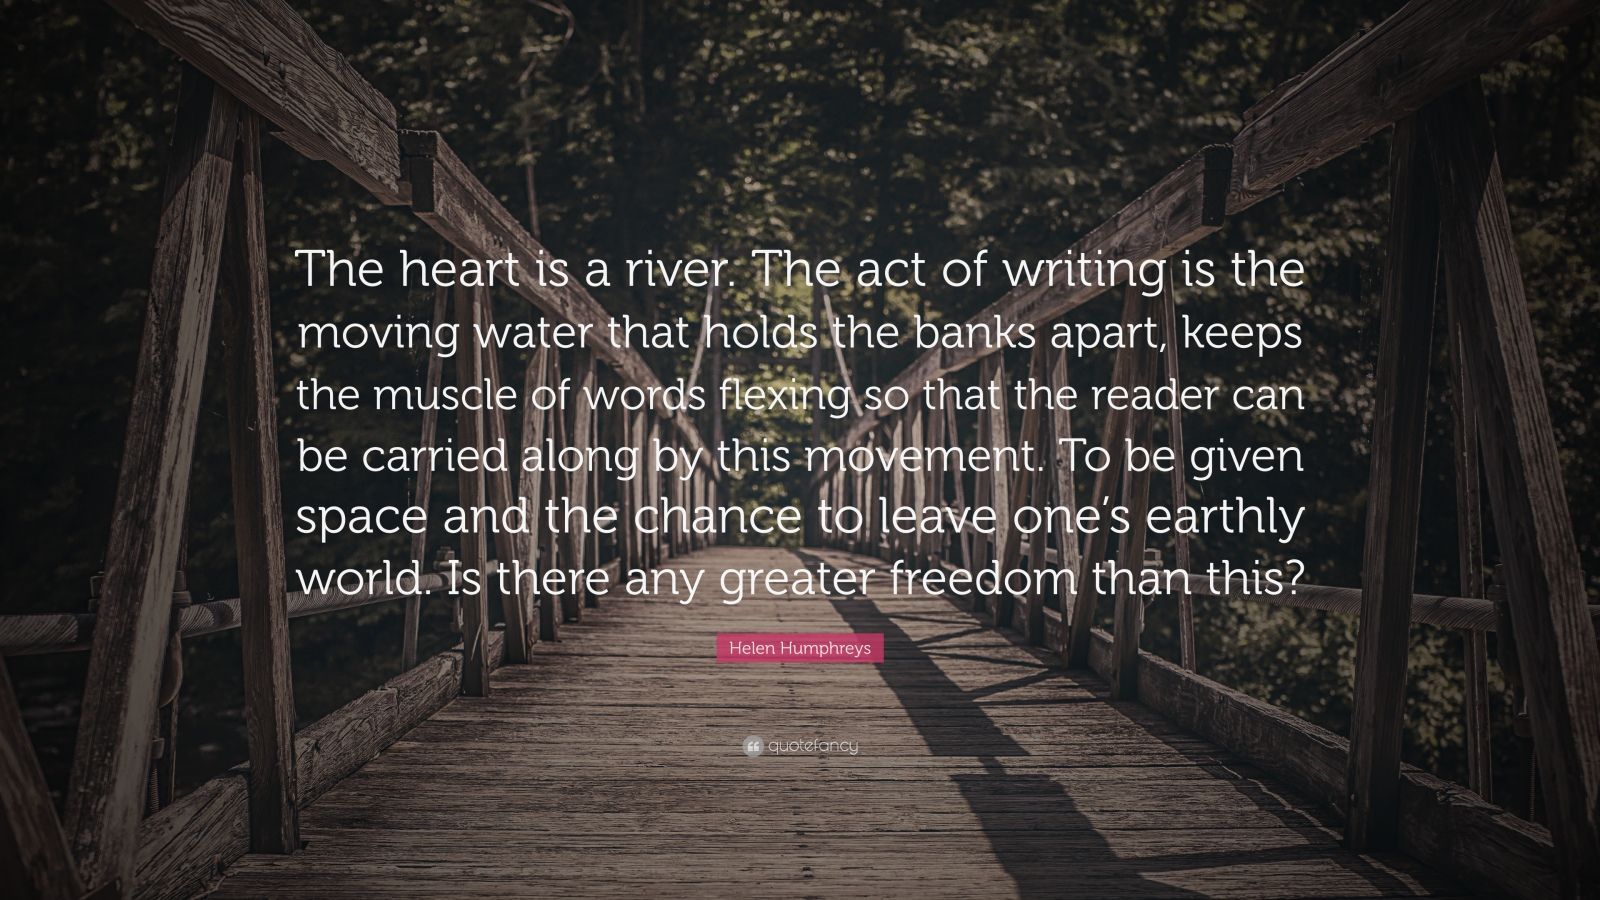 Helen Humphreys Quote: “The heart is a river. The act of writing is the  moving water that holds the banks apart, keeps the muscle of words  flexi...” (7 wallpapers) - Quotefancy